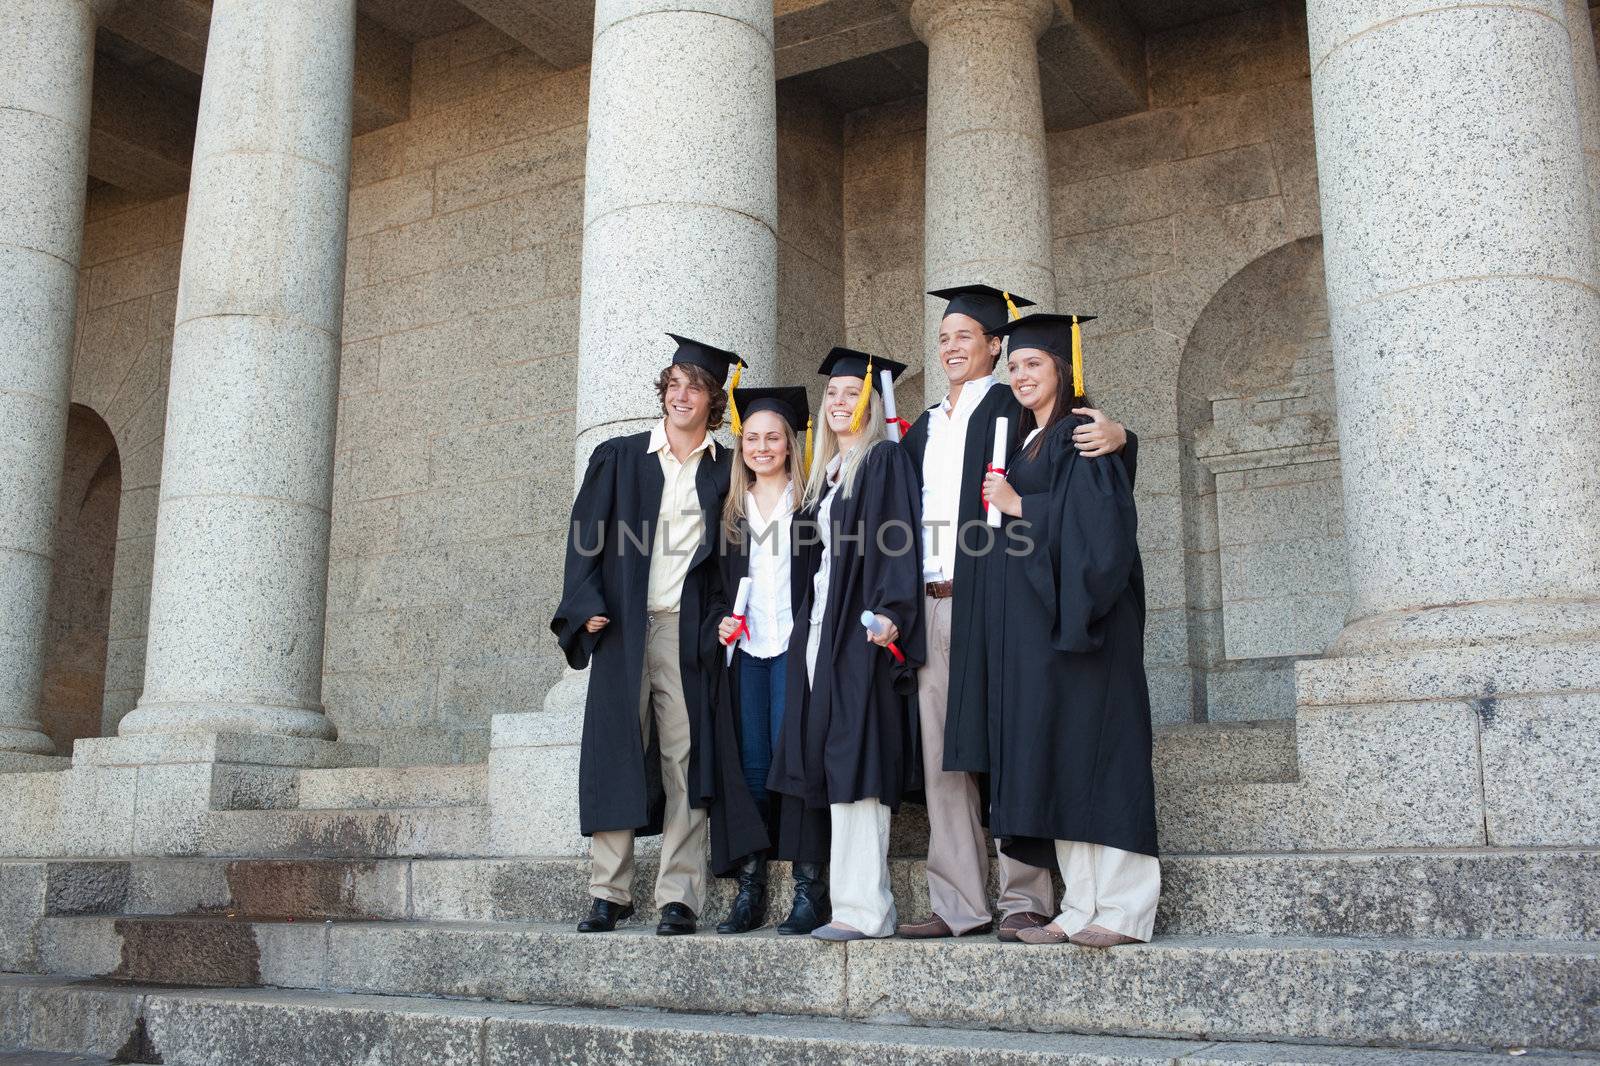 Five graduates posing while holding their diploma in front of the university